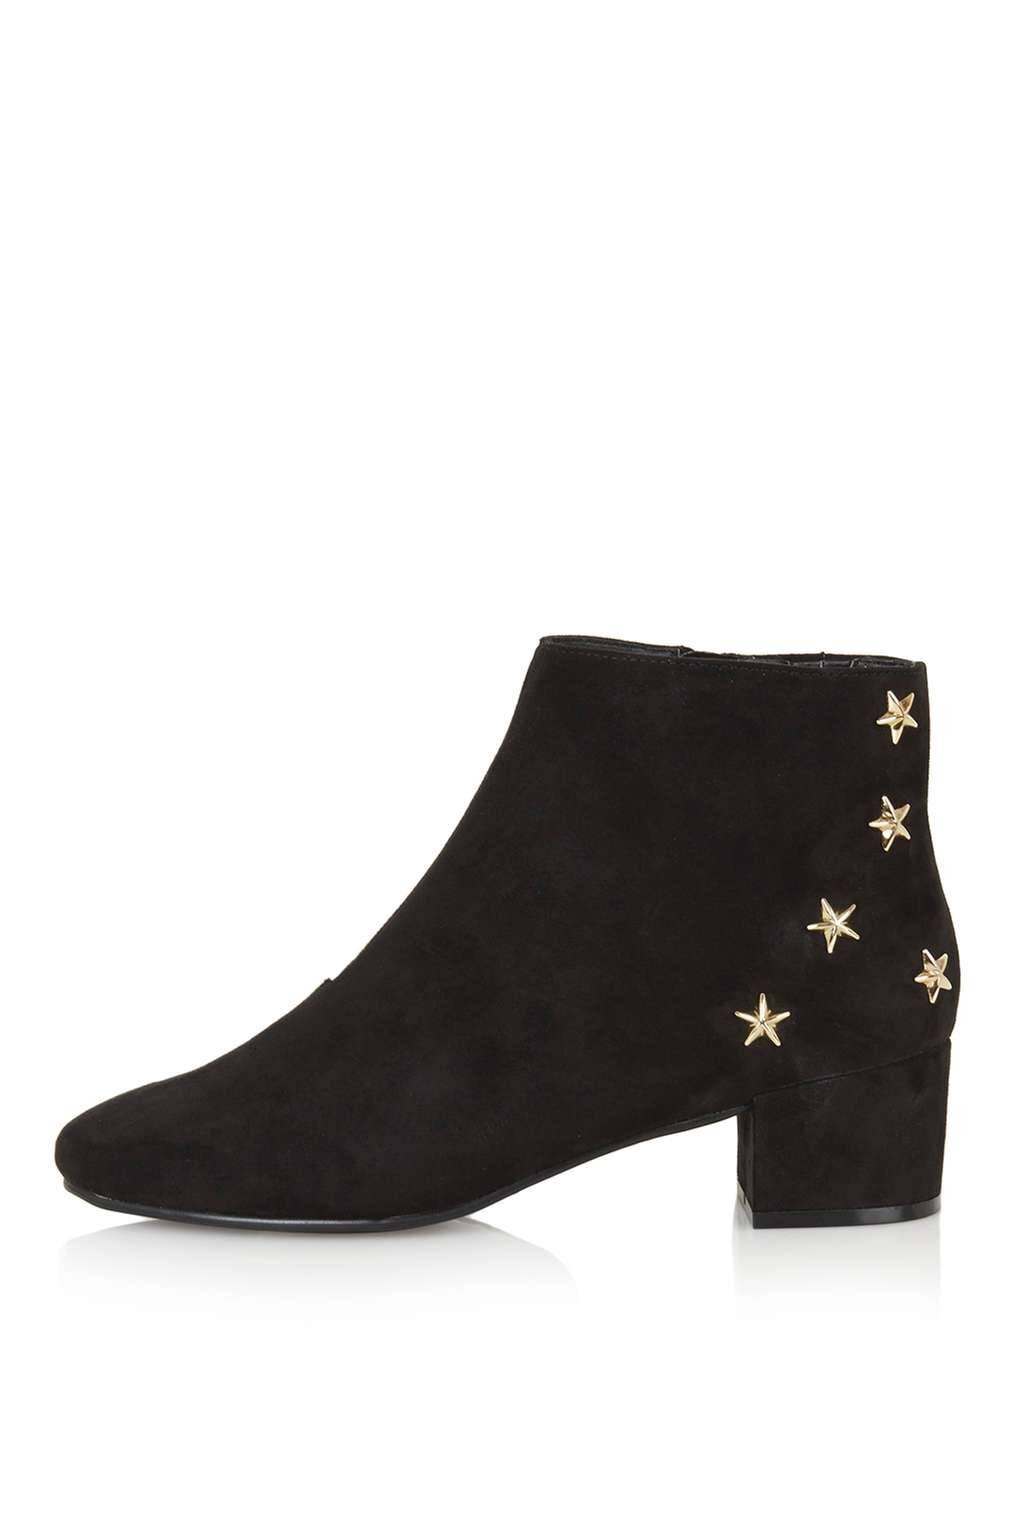 Topshop Betty Star Ankle Boots in Black — UFO No More